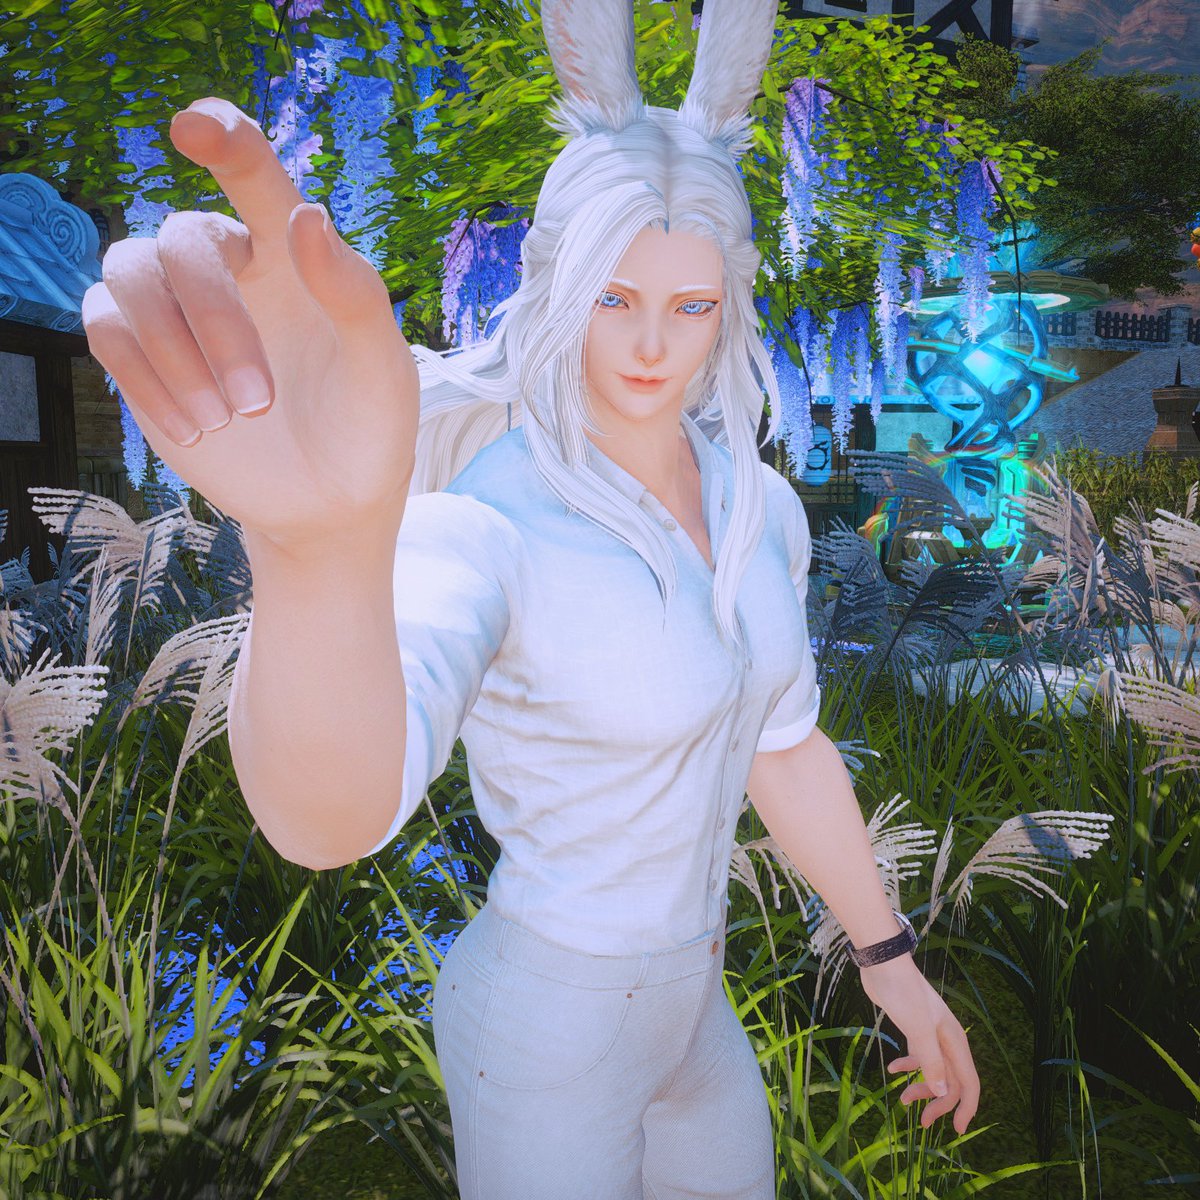 Boop your nose! ehe~💕 #GPOSERS #FF14 #FF14SS #Viera